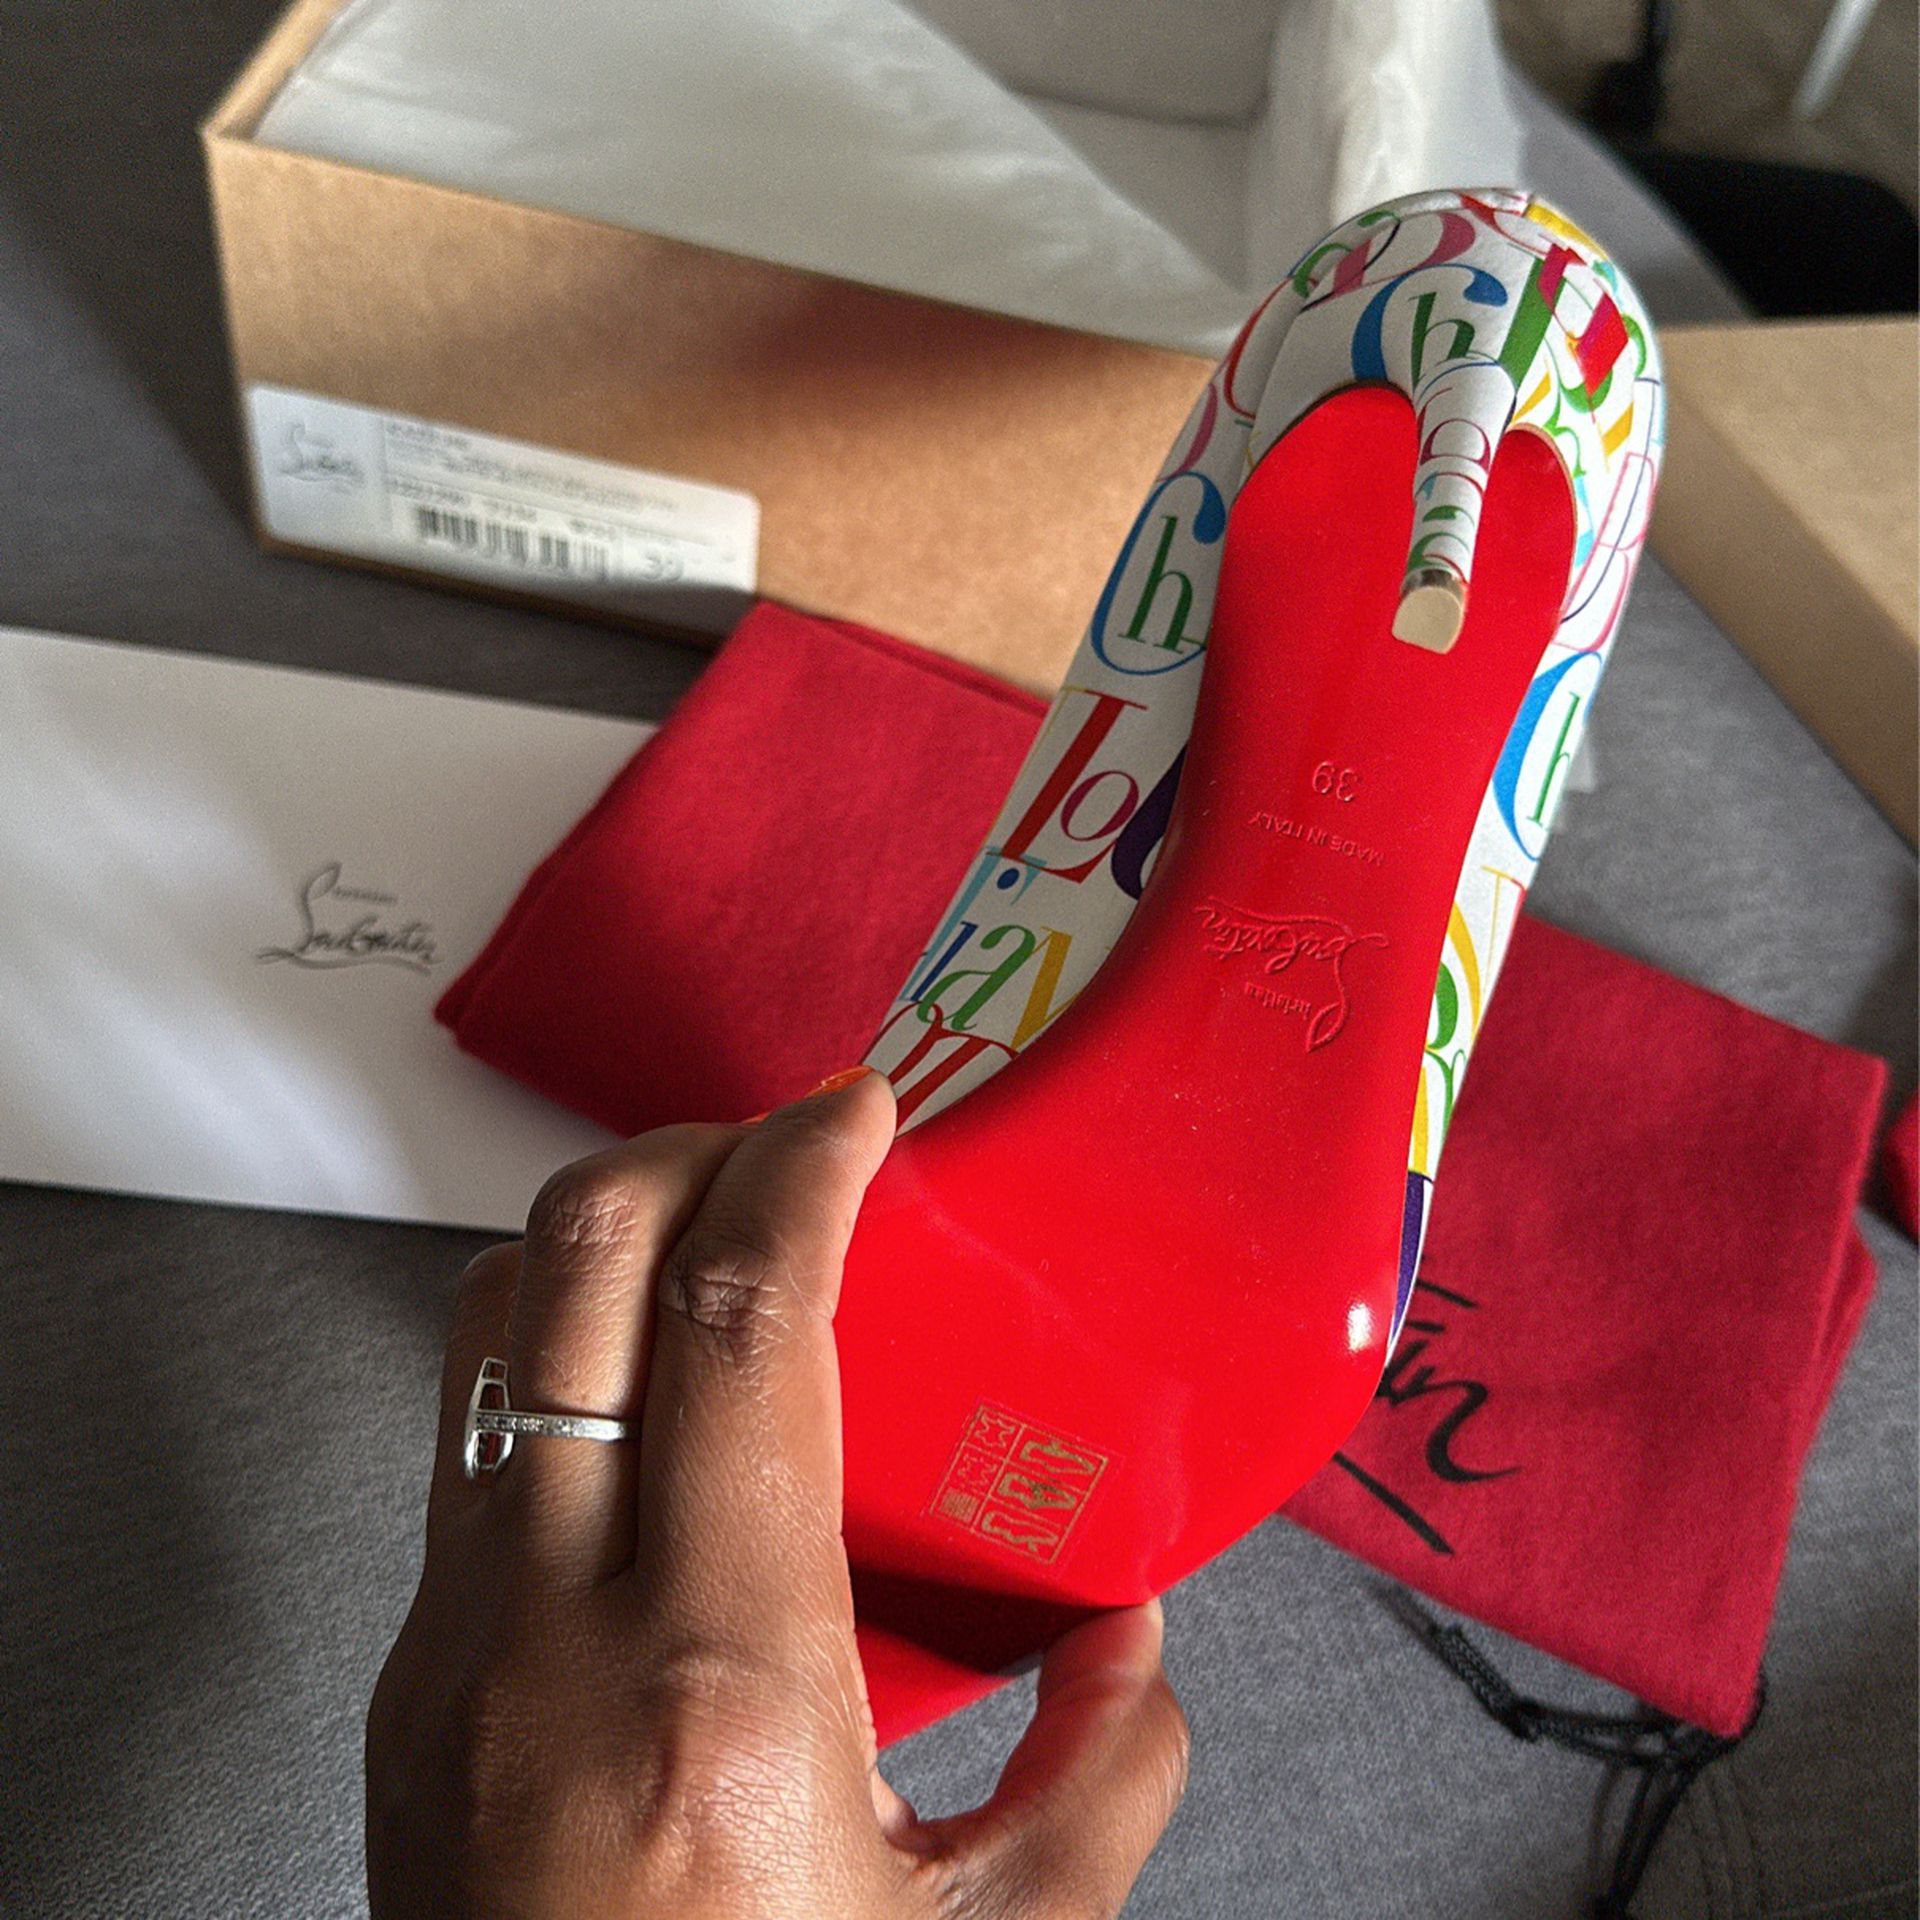 Christian Louboutin (Red Bottoms) Brand New